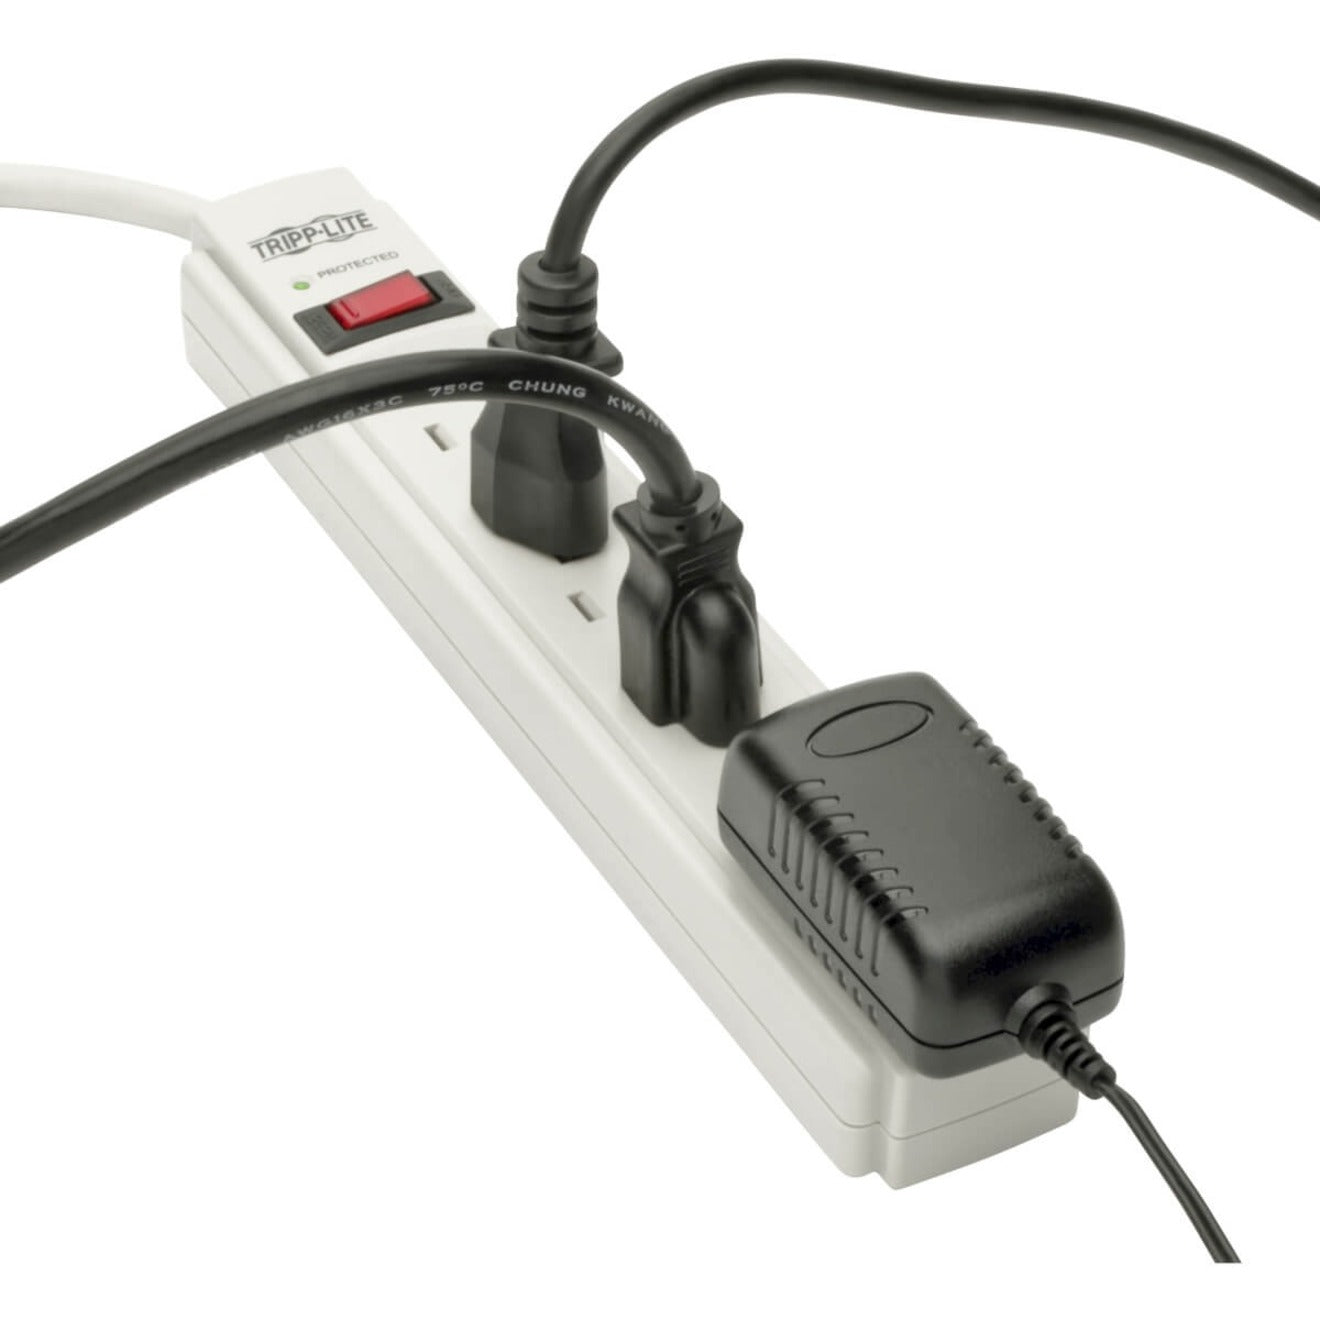 Tripp Lite TLP606 Protect It! 6-Outlet Economy Surge Protector, 790 Joules, 6' Cord